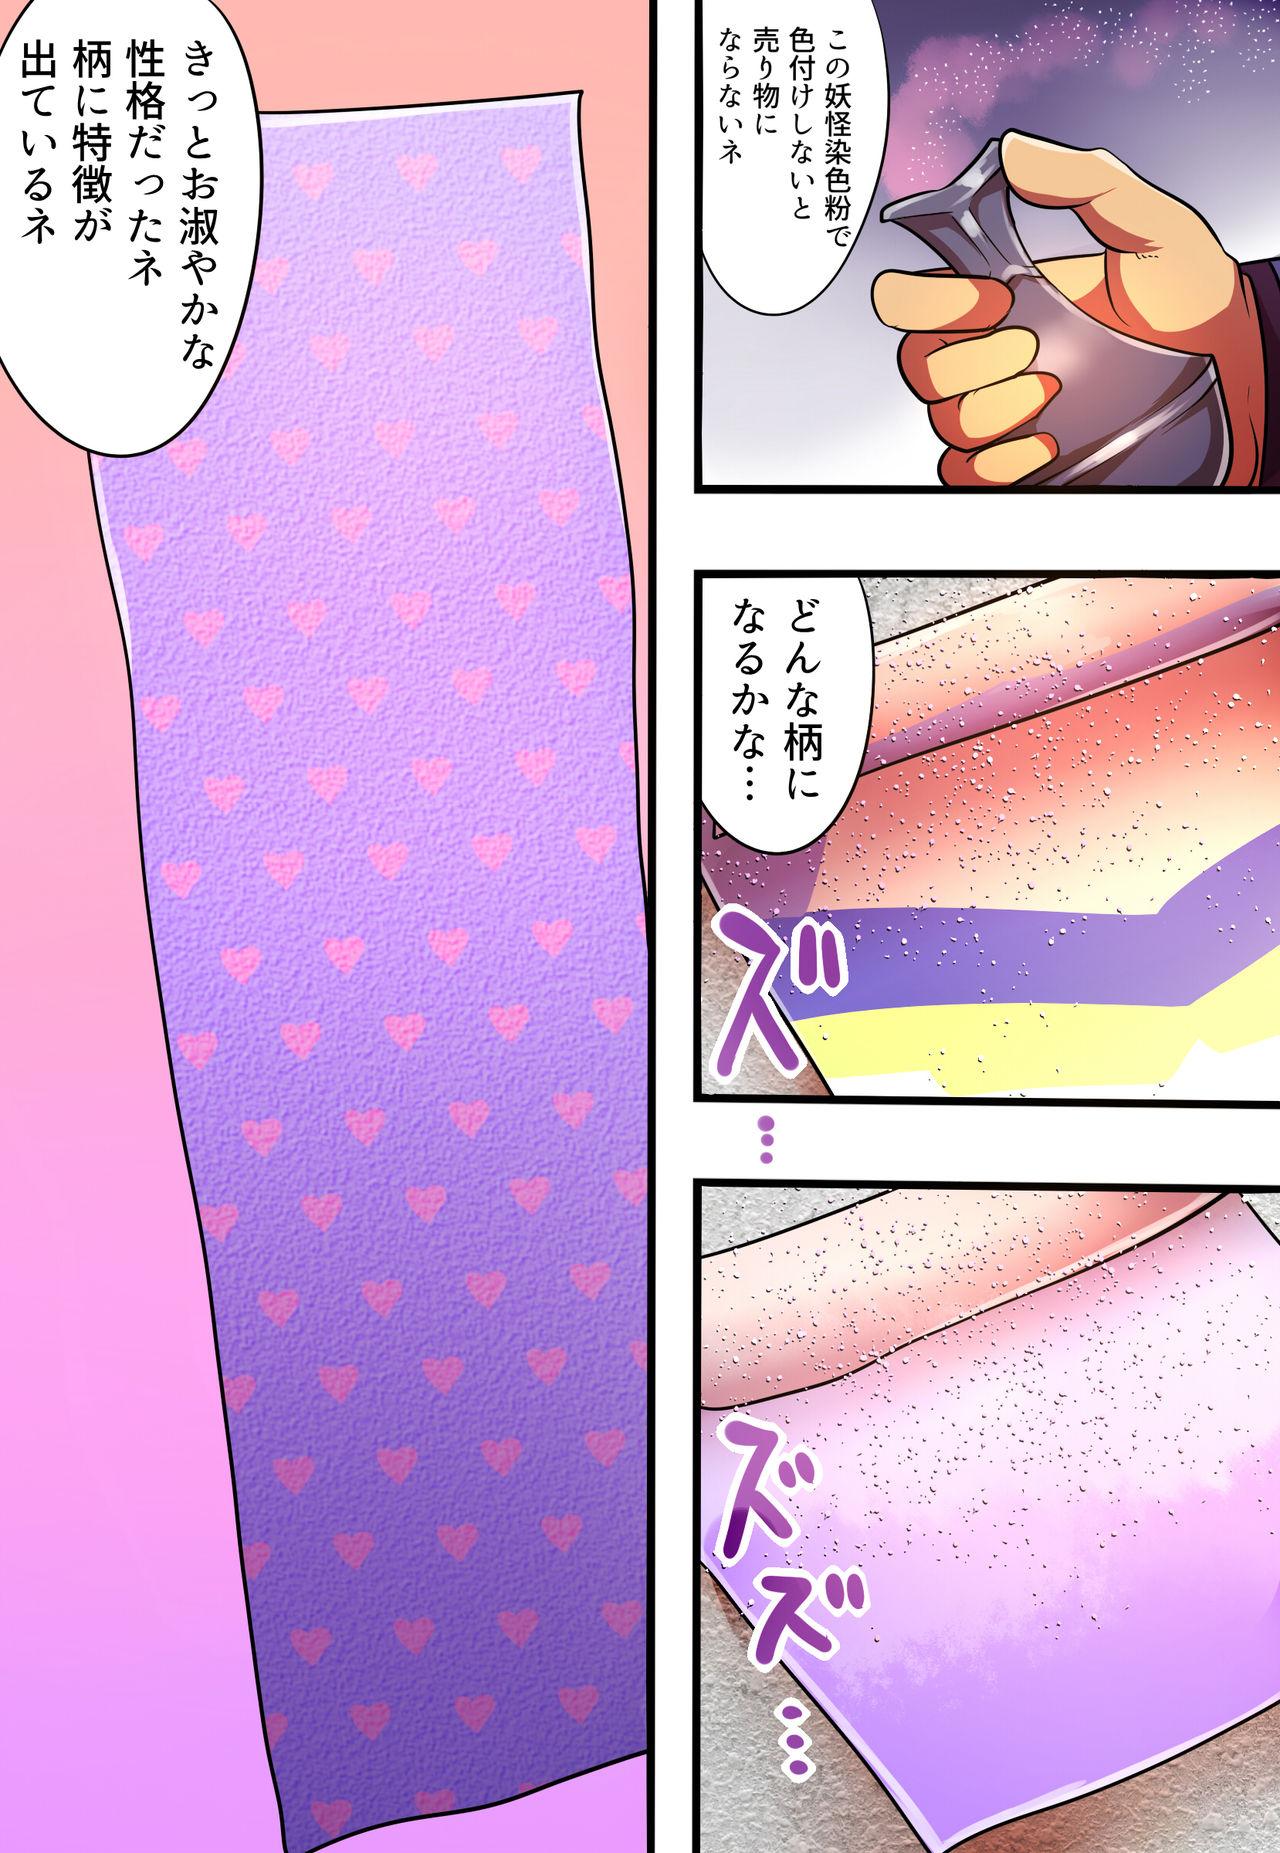 Uncut shinenkan Comic of Textile-ification ghost storys Fake - Page 4